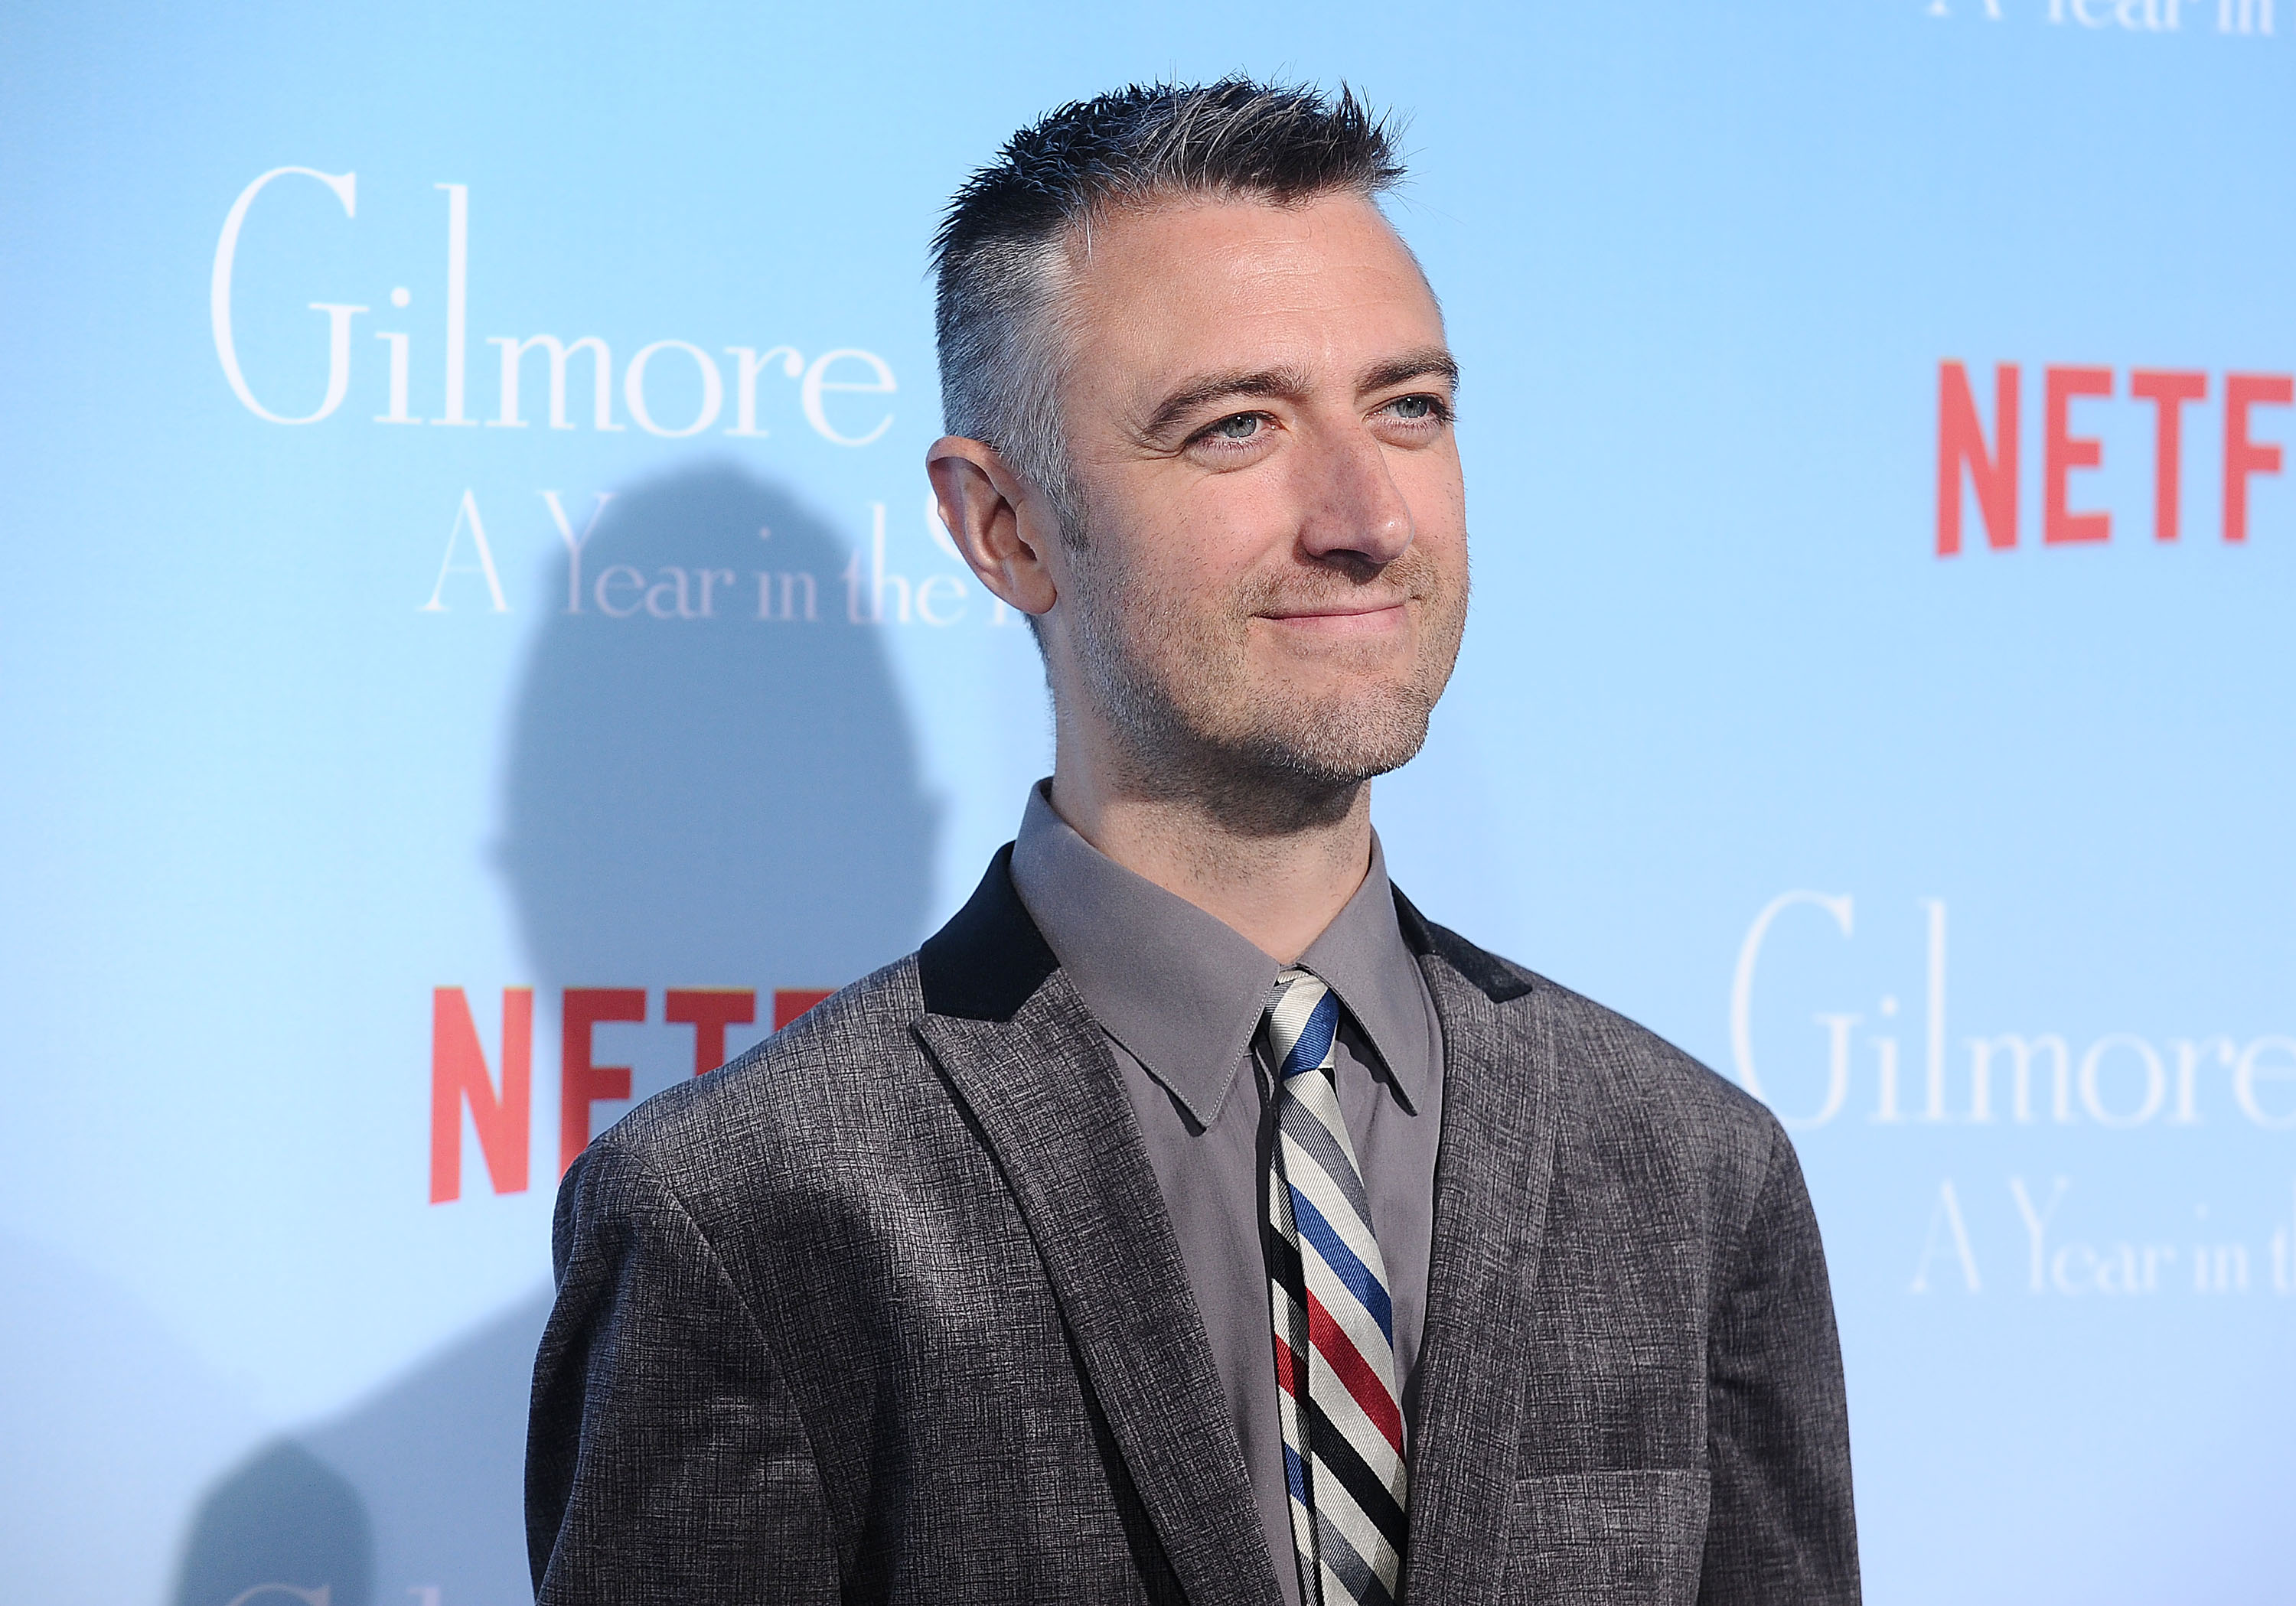 Sean Gunn attends the premiere of 'Gilmore Girls: A Year in the Life' at Regency Bruin Theatre